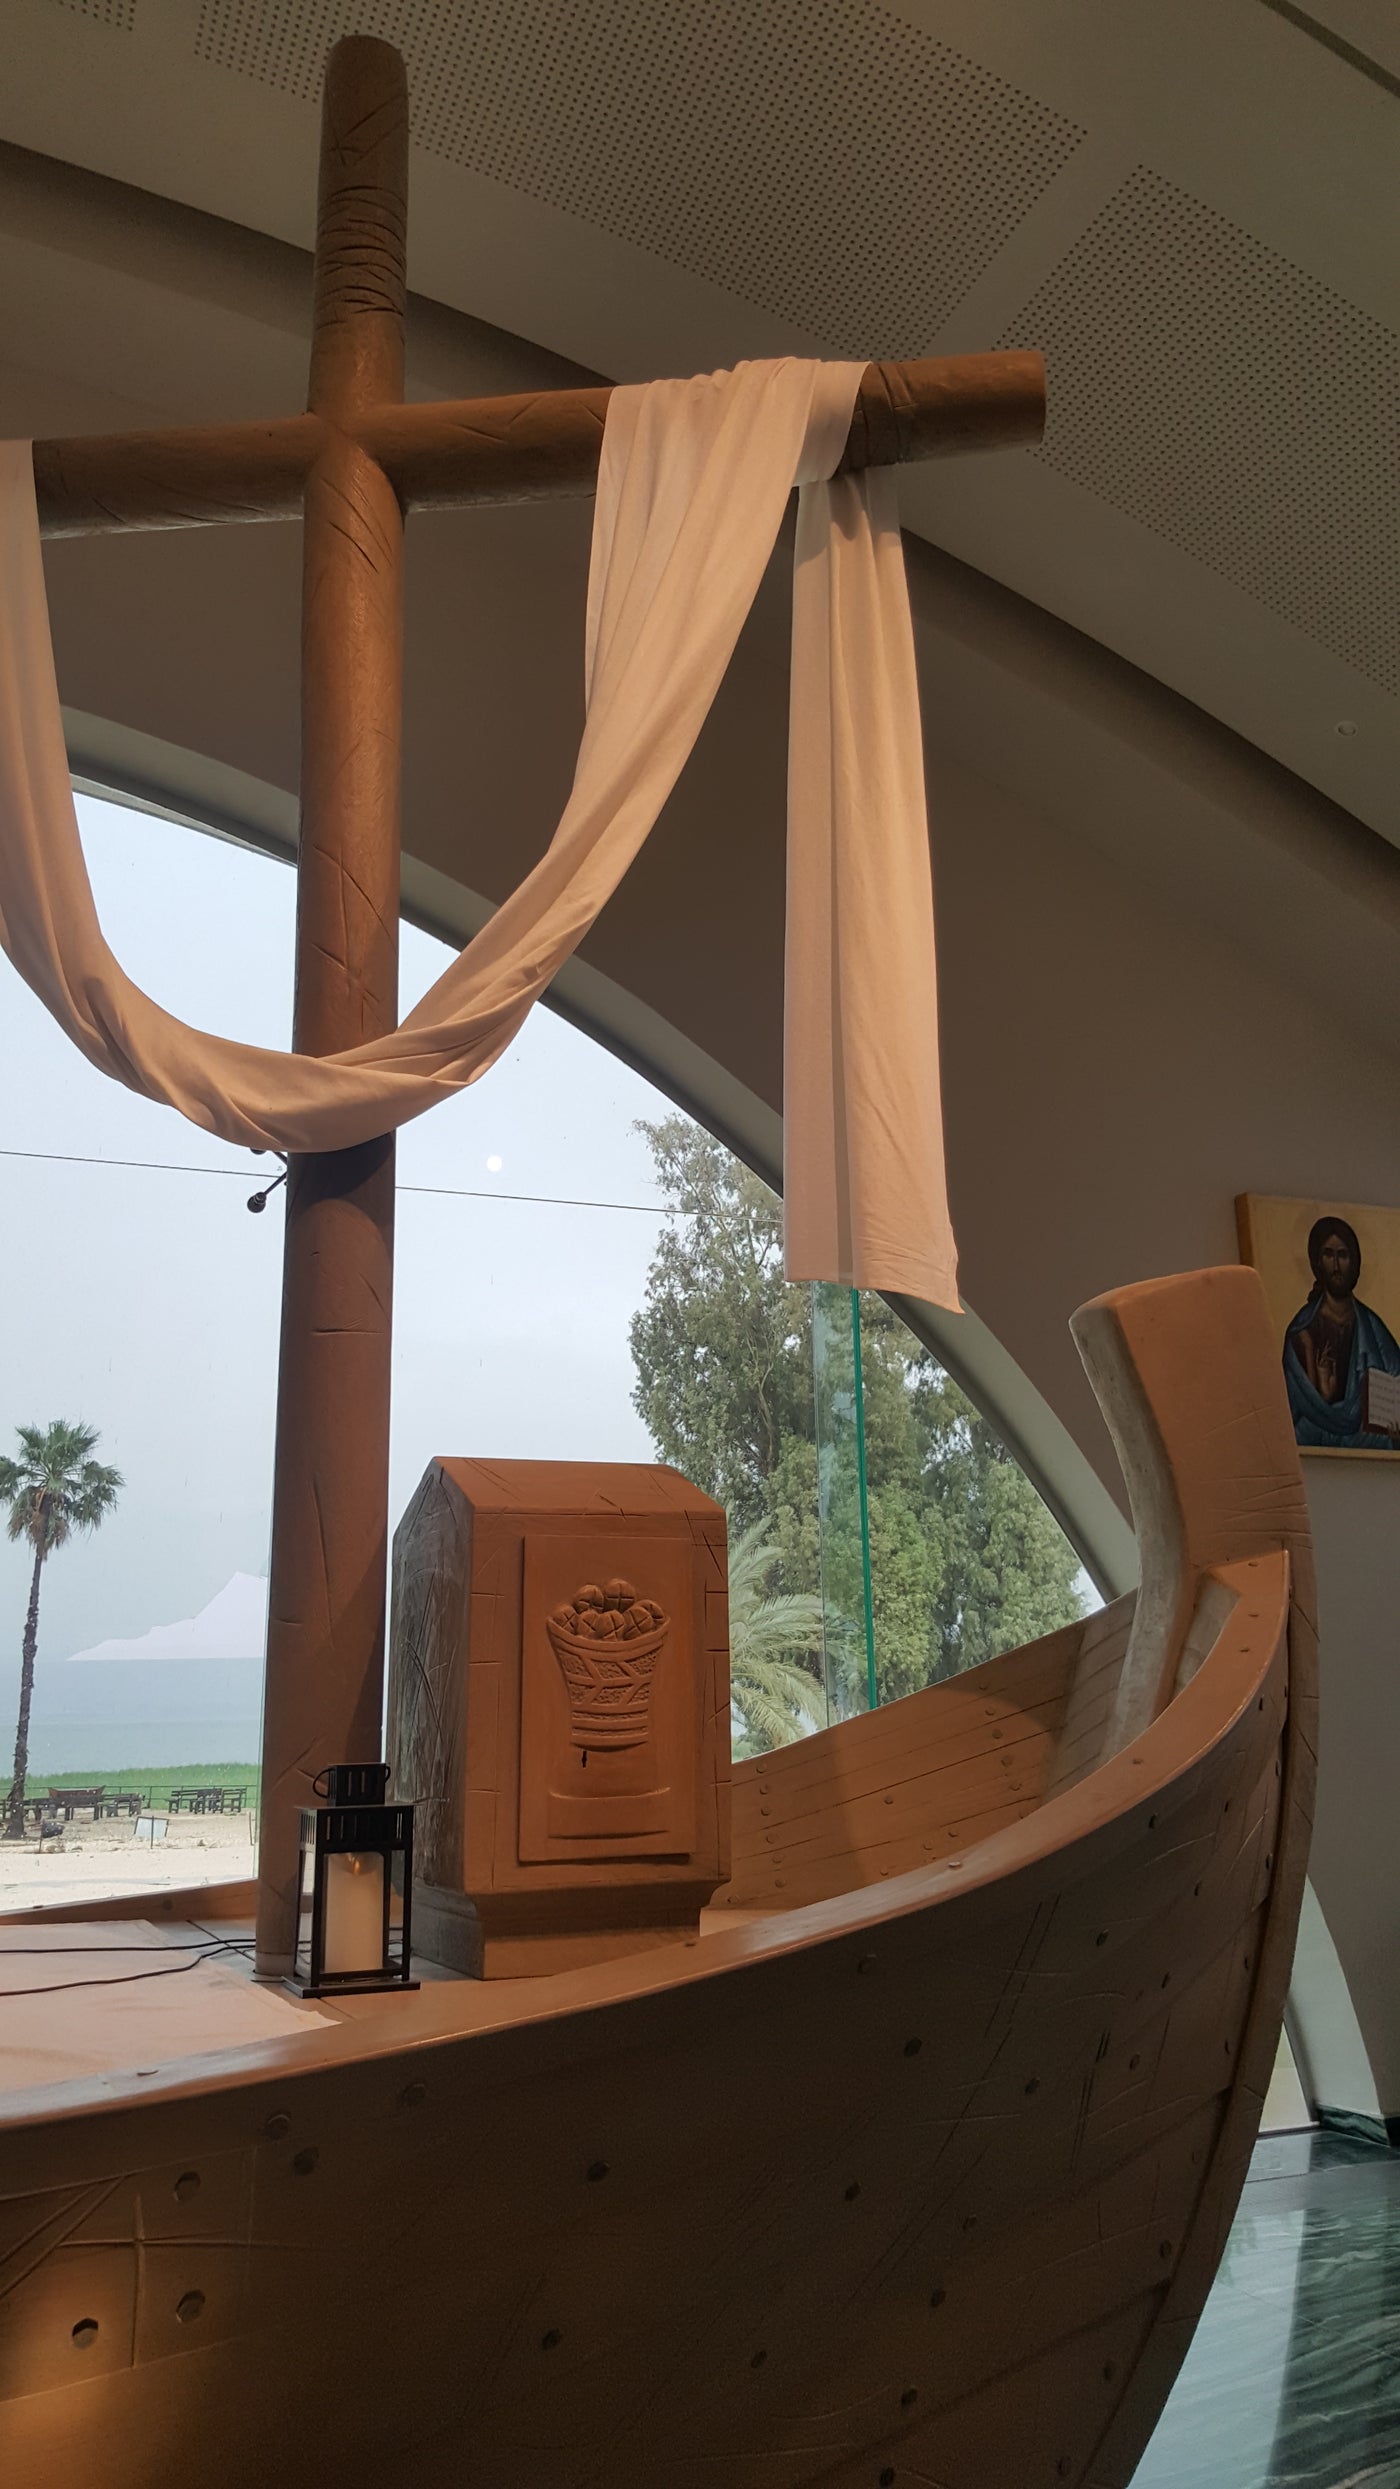 magdala tabernacle blessed by pope francis - hometown of mary magdalene